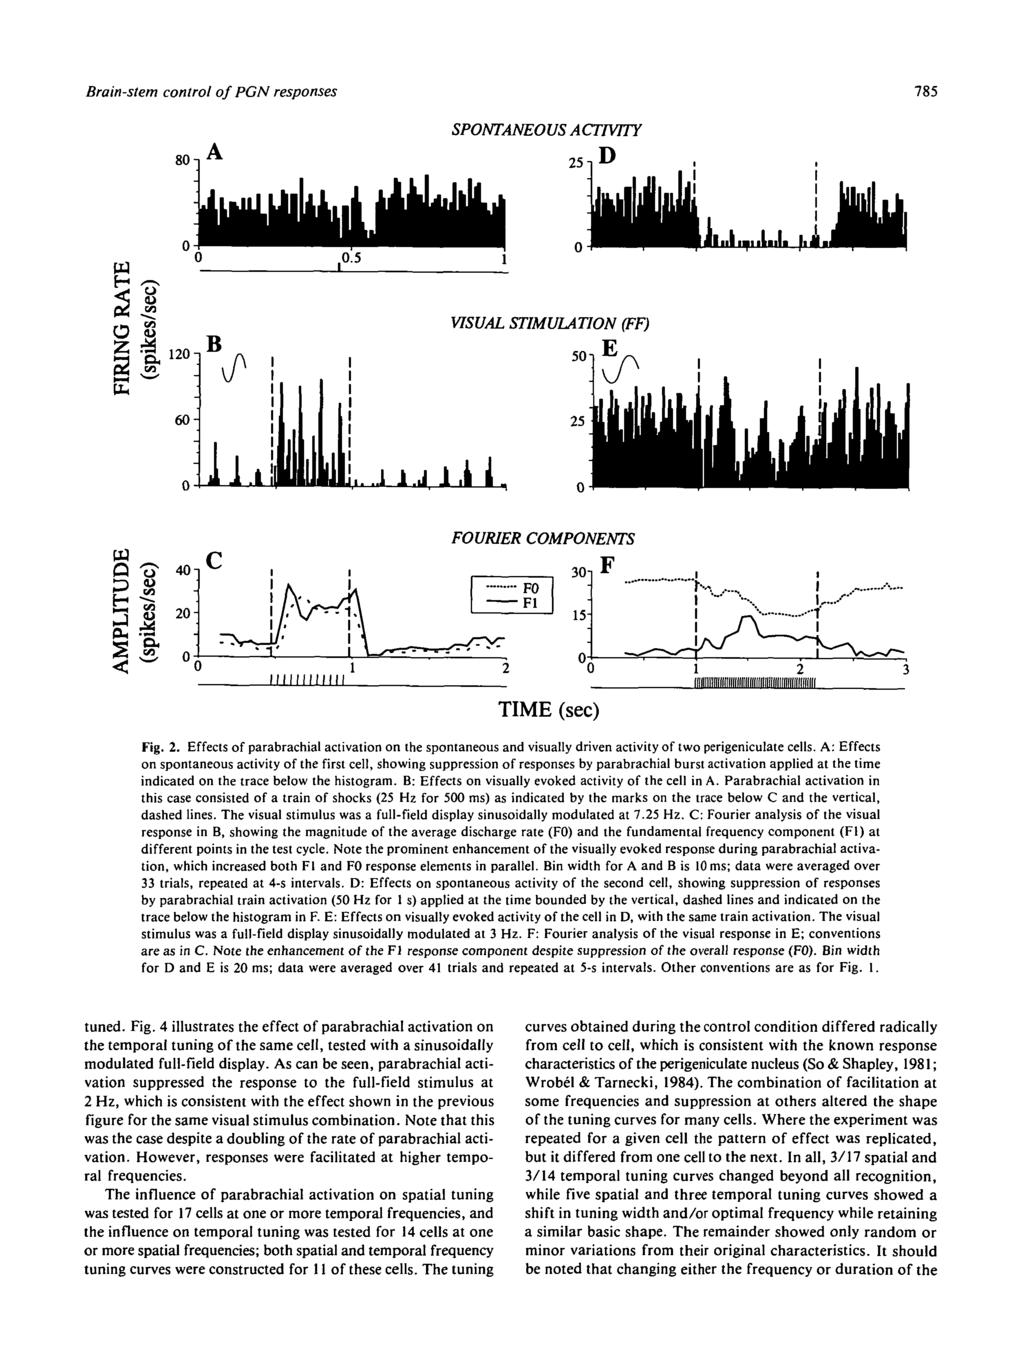 Brain-stem control of PGN responses 785 SPONTANEOUS ACTIVITY 80 -i 25 VISUAL STIMULATION (FT) 50 _1 8 CO 20- FOURIER COMPONENTS 30 F0 Fl 15H F TIME (sec) Fig. 2. Effects of parabrachial activation on the spontaneous and visually driven activity of two perigeniculate cells.